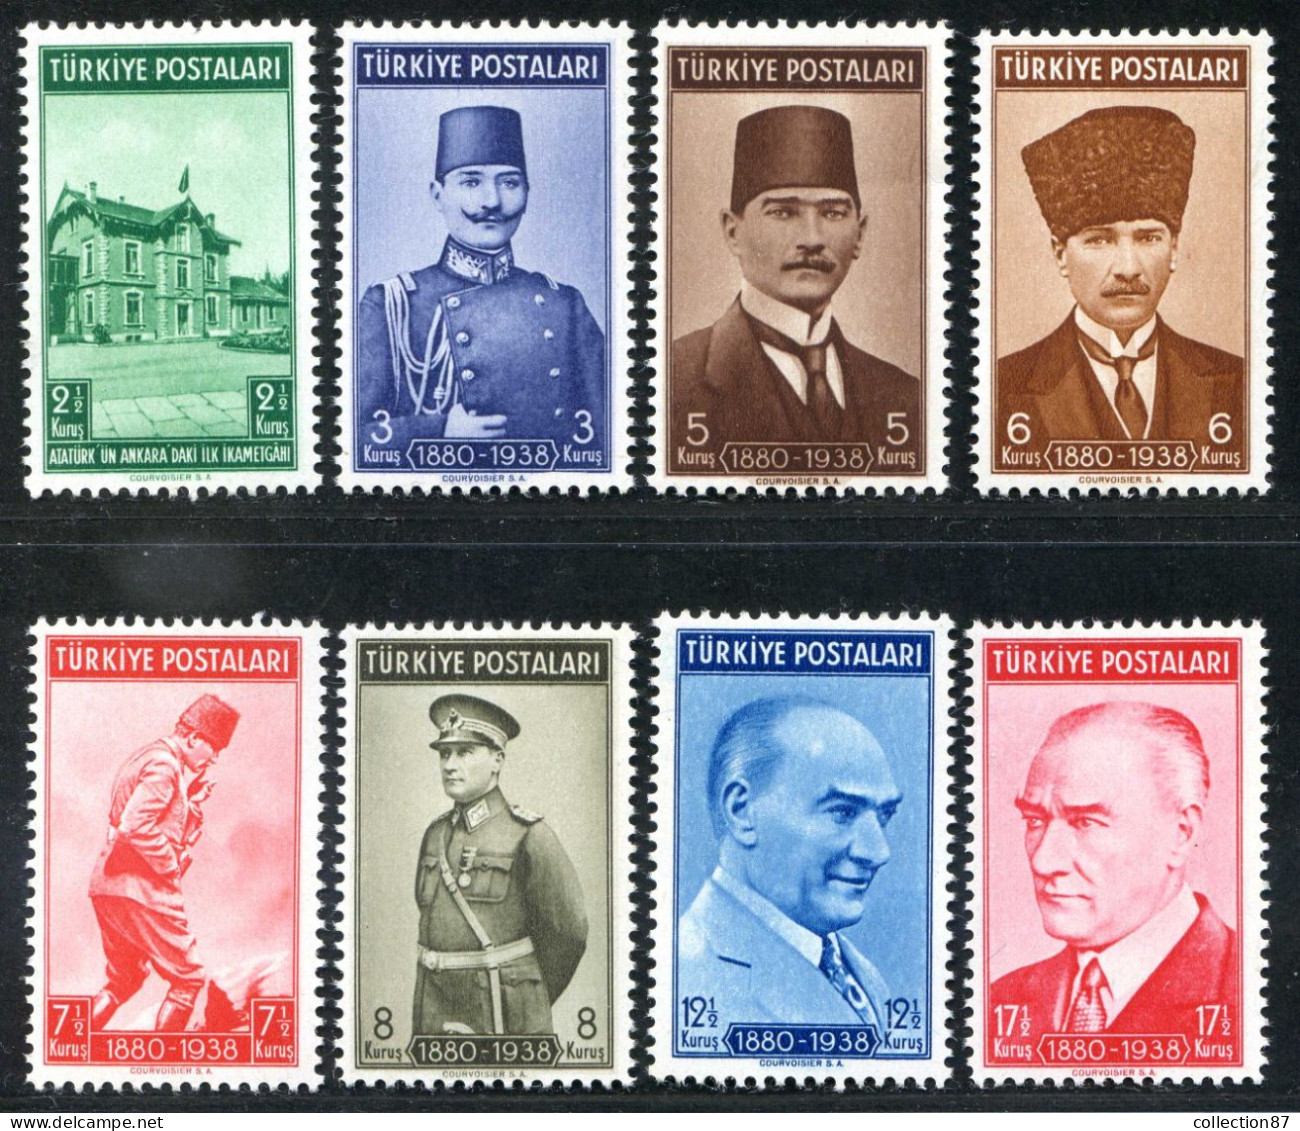 REF 091 > TURQUIE < Yv N° 922 à 929 * * Neuf Luxe Dos Visible MNH * * < Président Ataturk - Nuevos